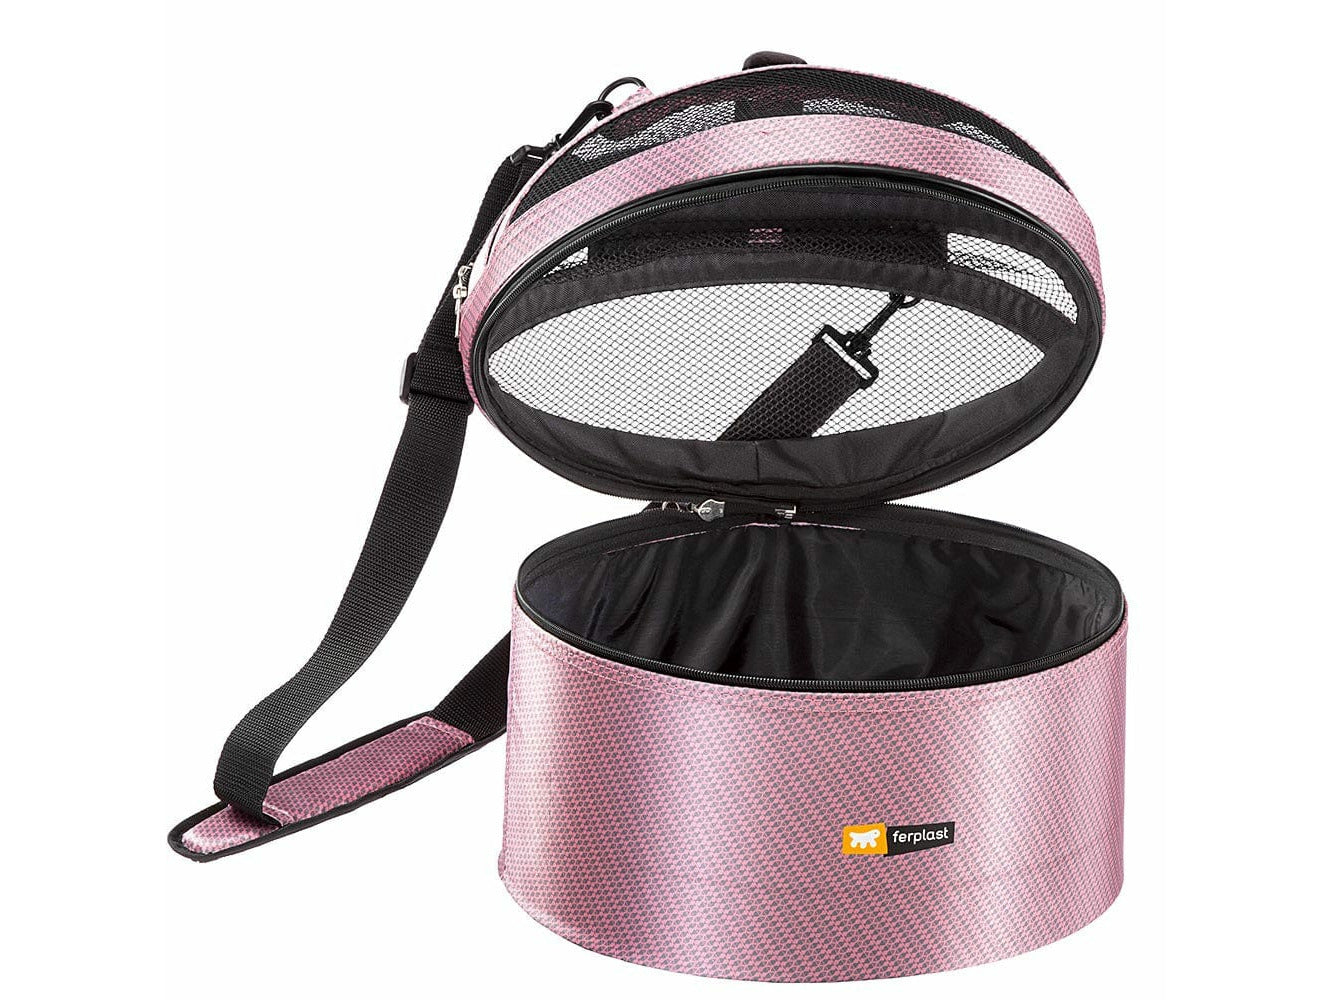 Cocotte Pink